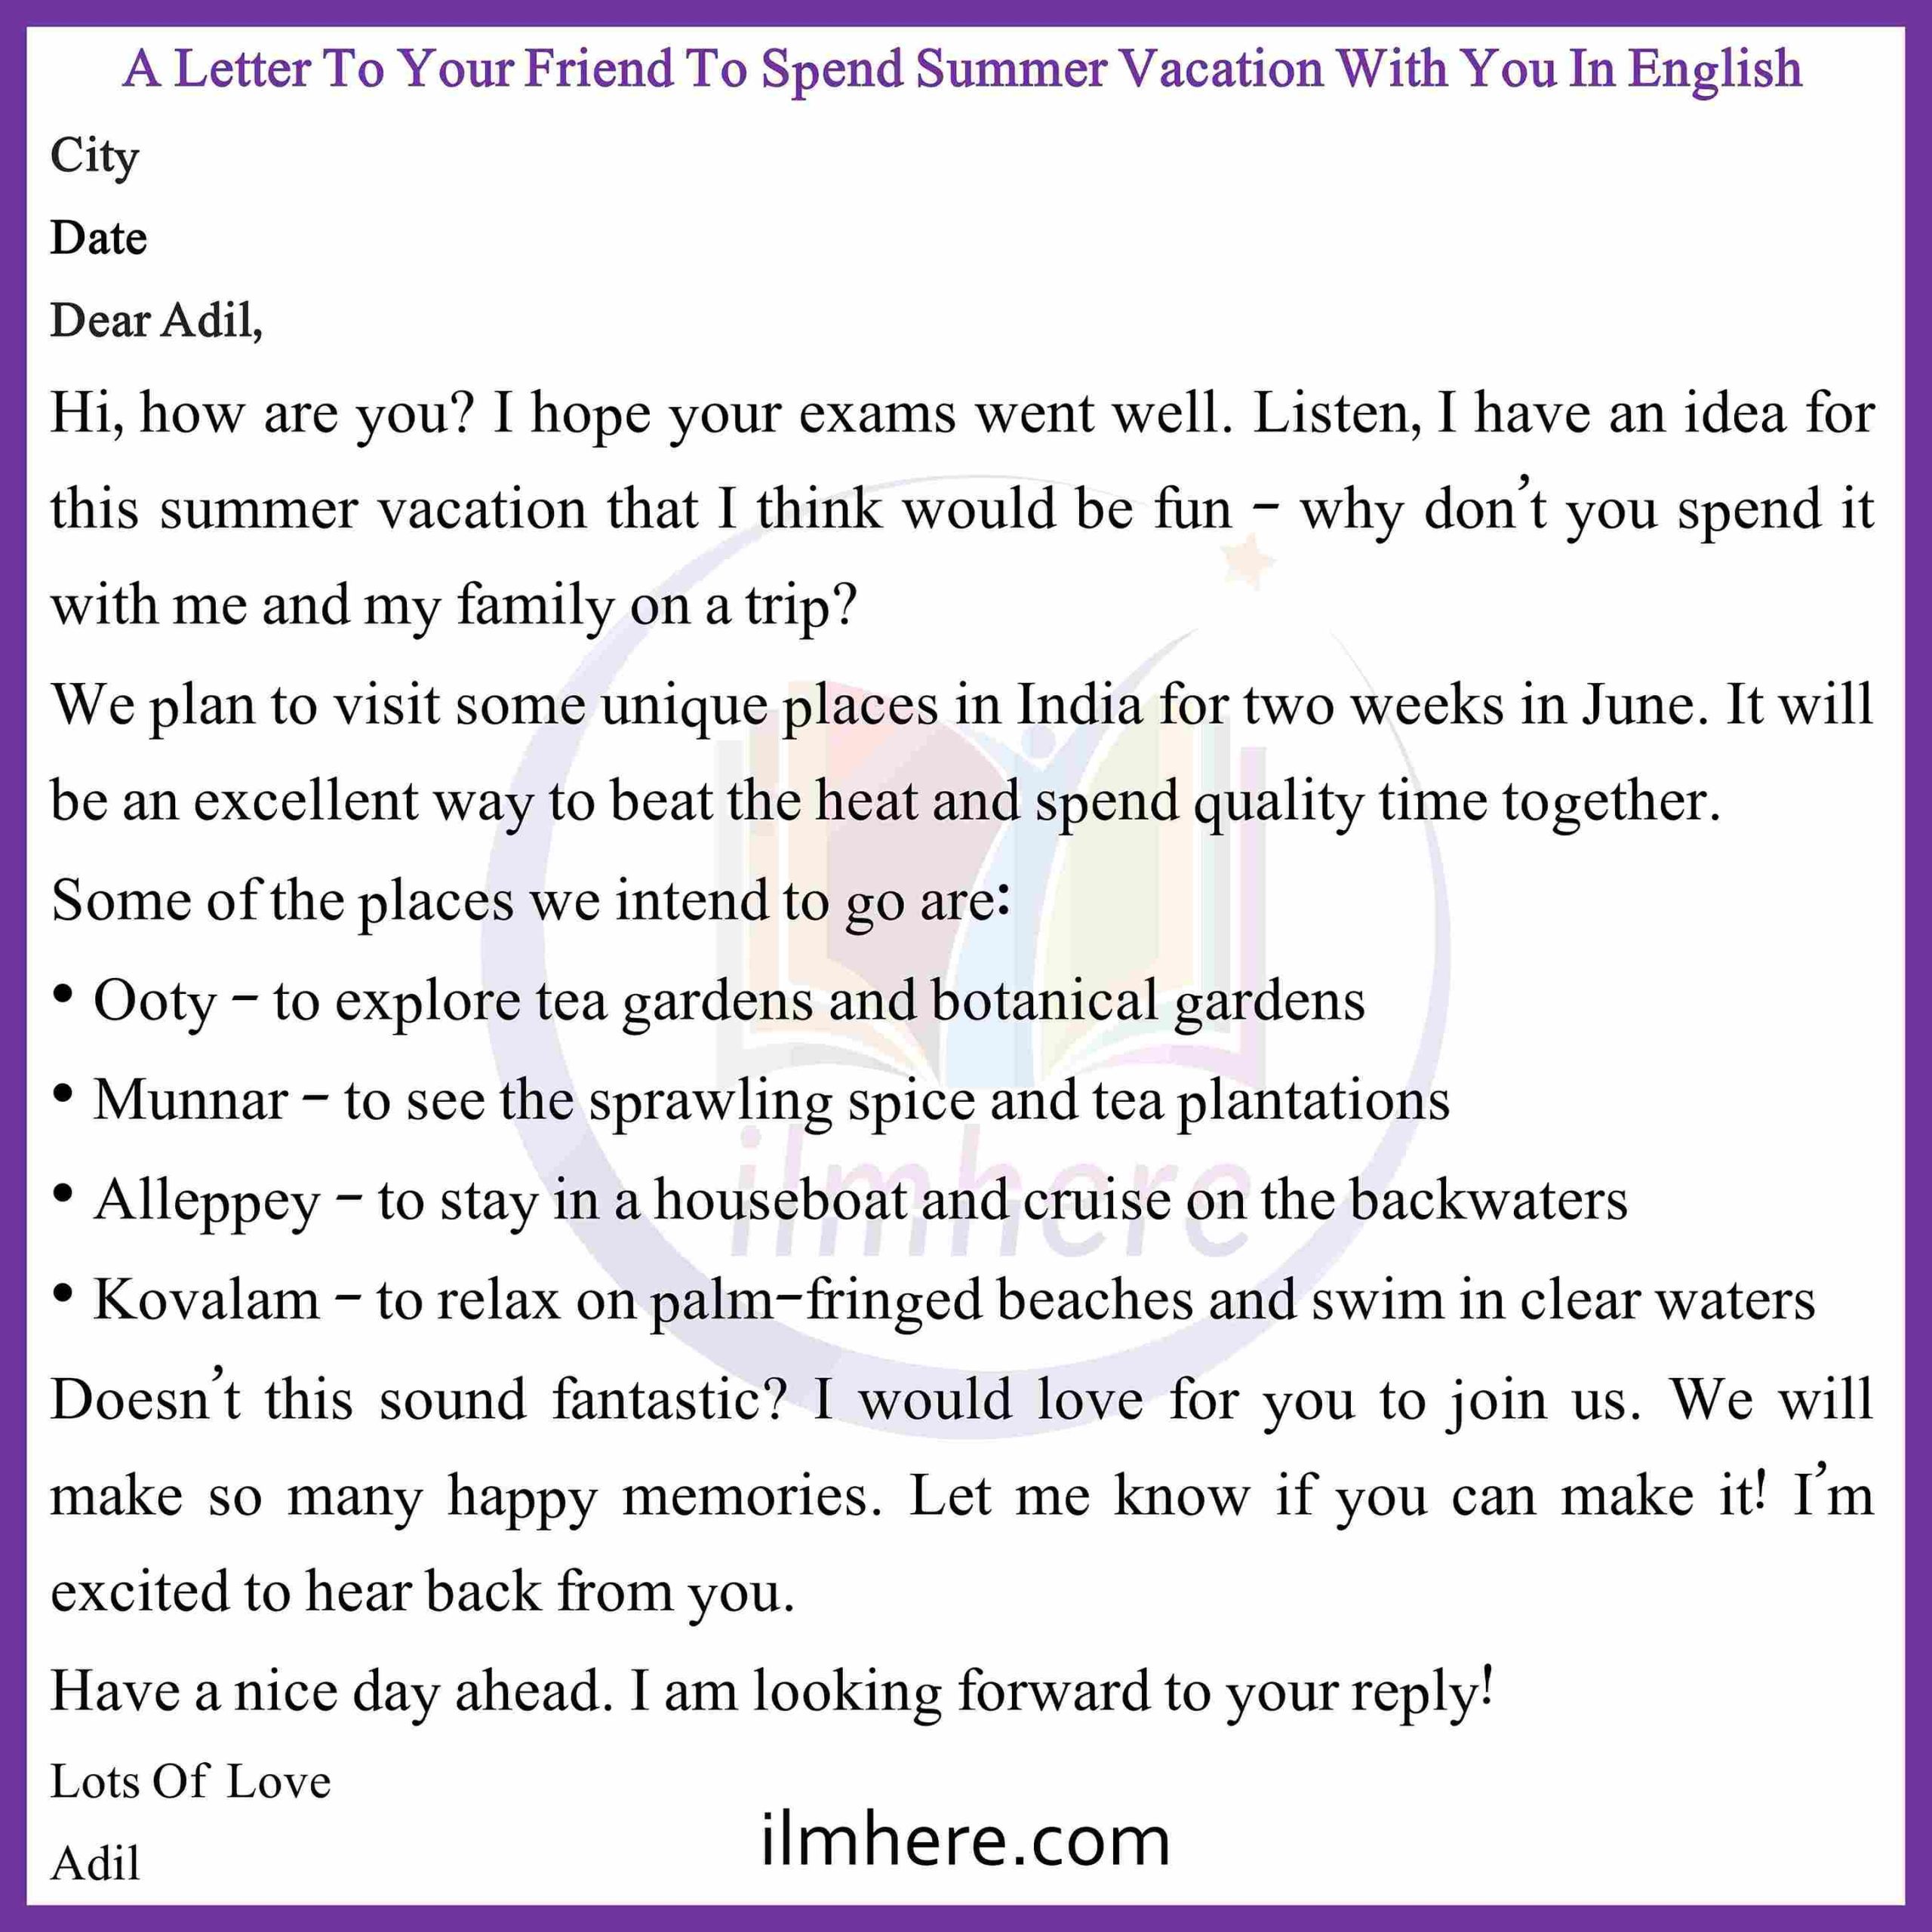 How to Write A Letter To Your Friend To Spend Summer Vacation With You In English